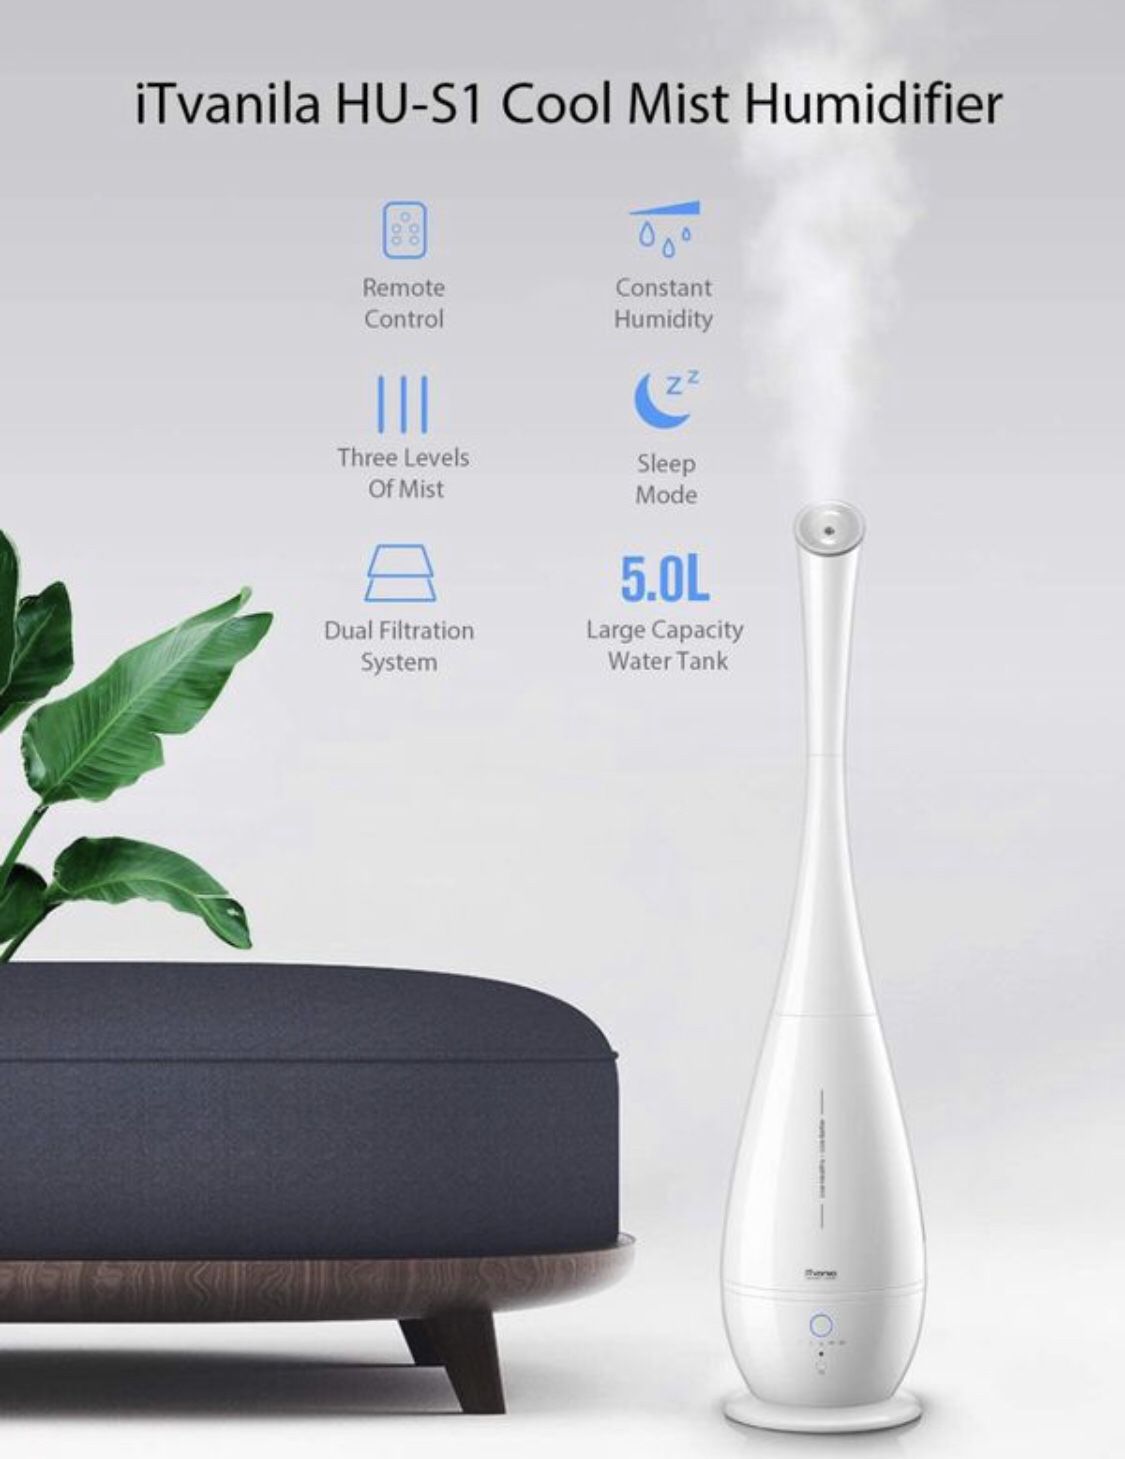 I Tvanila Cool Mist Humidifiers Large Room, 5L Floor Humidifiers for Bedroom Office with Remote Control Smart Humidity Oil Diffuser Tray